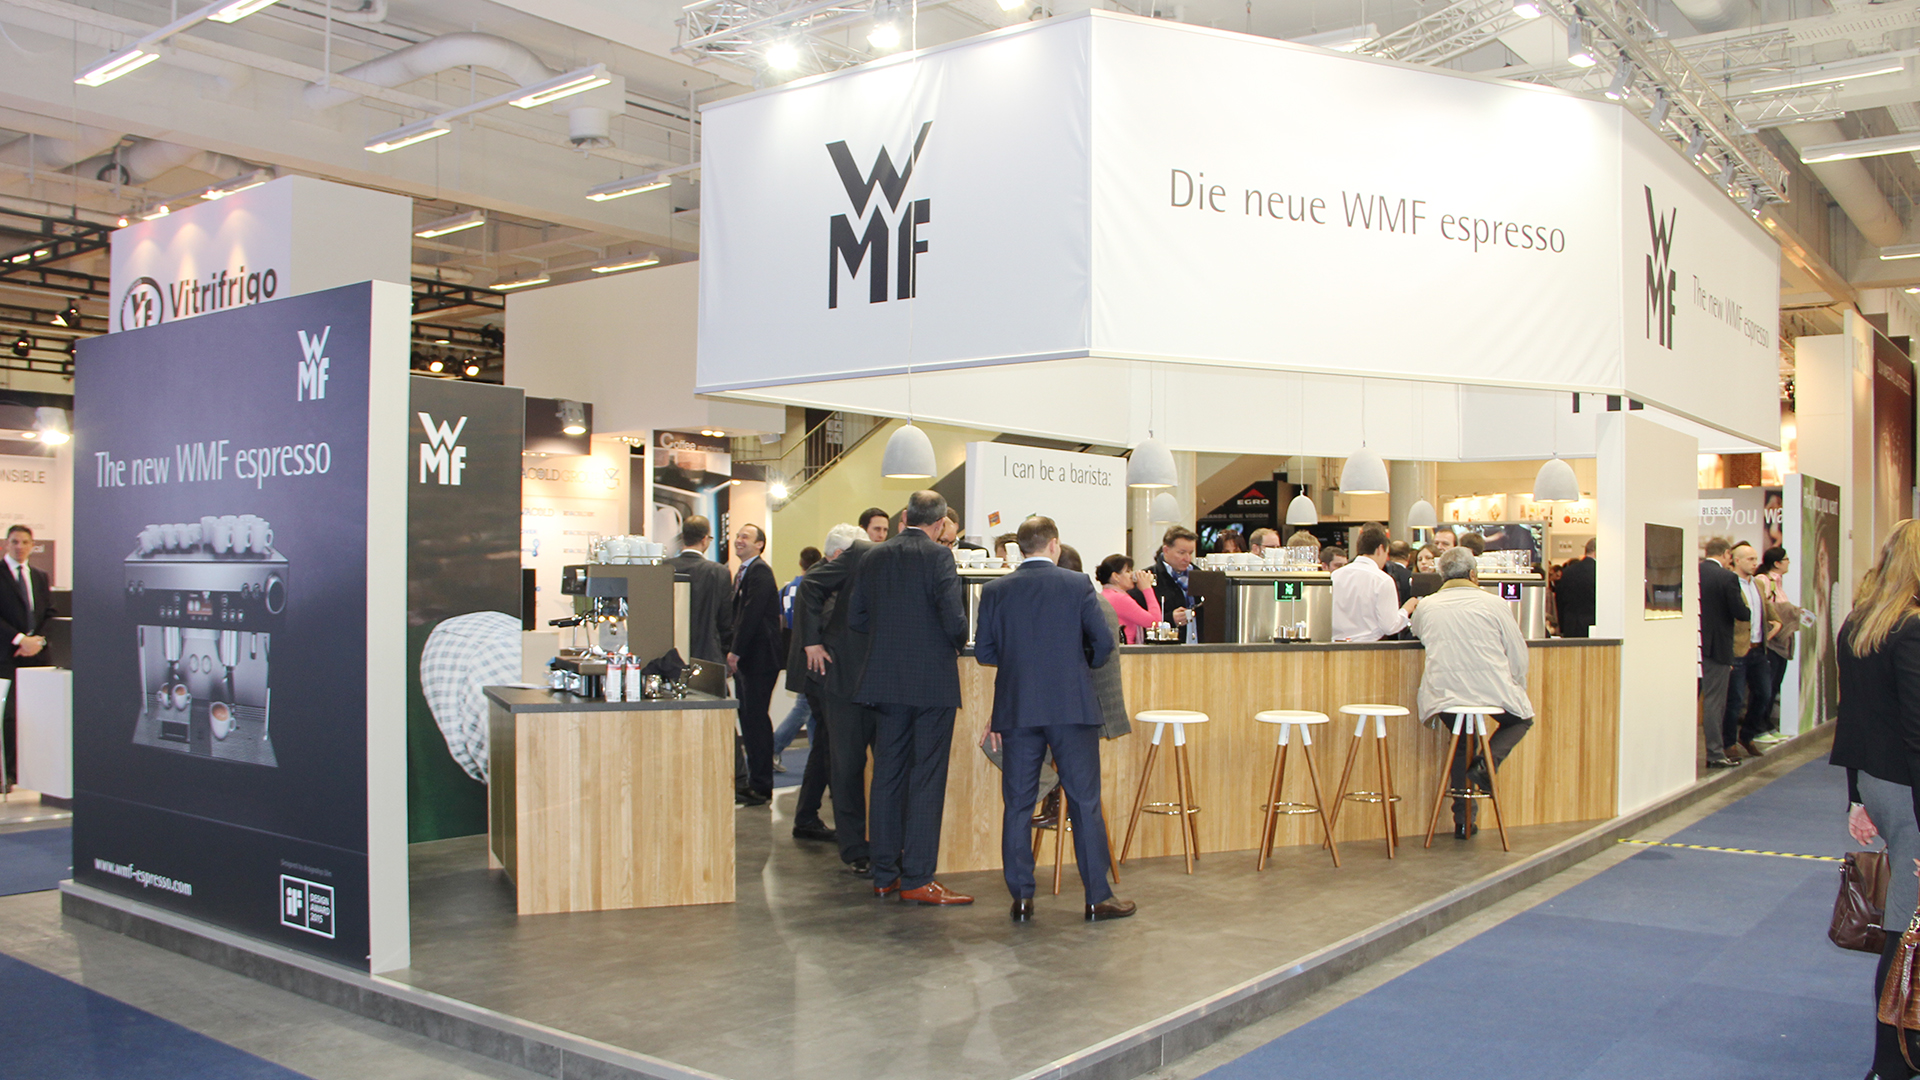 At Internorga 2015, WMF will be presenting the new WMF espresso semi-automatic machines, detached from the main exhibition stand. The trade fair visitors can get a direct impression of the professional semi-automatic machine, served at a long wooden counter. red dot award 2015 - best of the best - Designpreis - designship GmbH - product design - industrial design - interface design - iF world design index - Top 25 Industry - Top 100 design studios worldwide - we love design